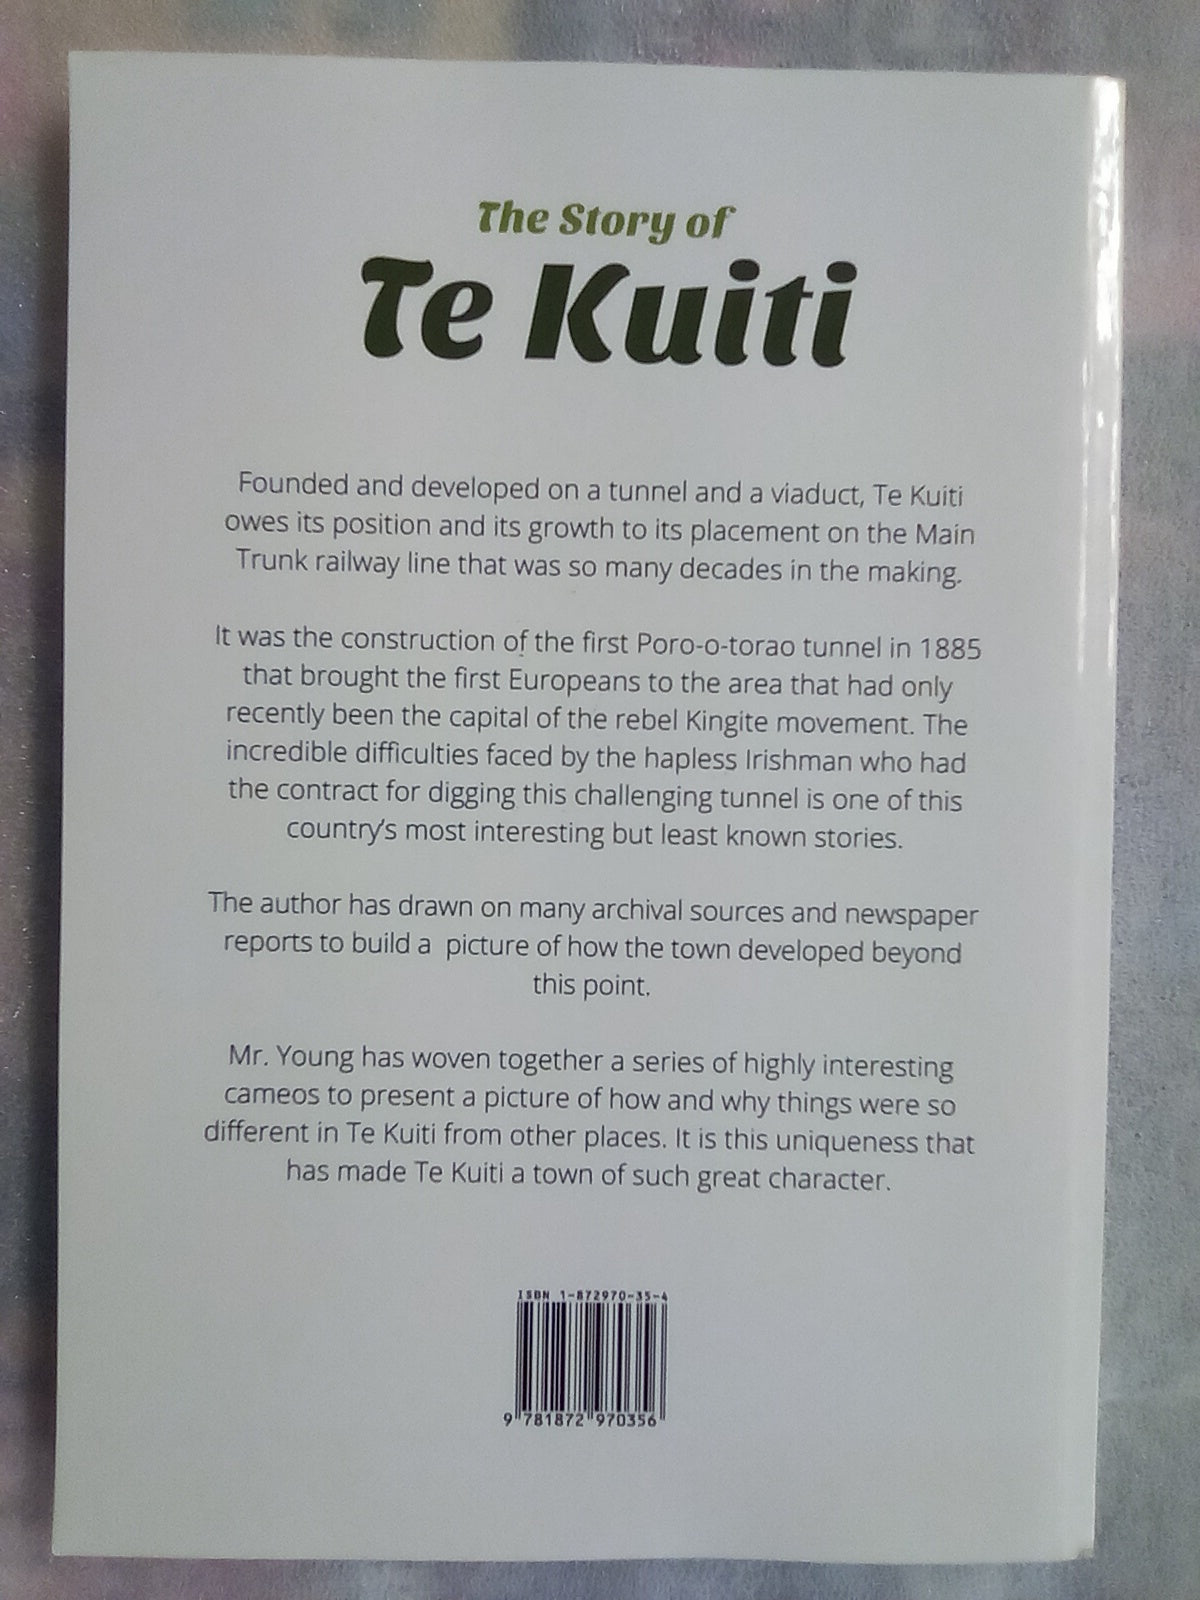 The Story of Te Kuiti by Russell Young (Signed Copy)